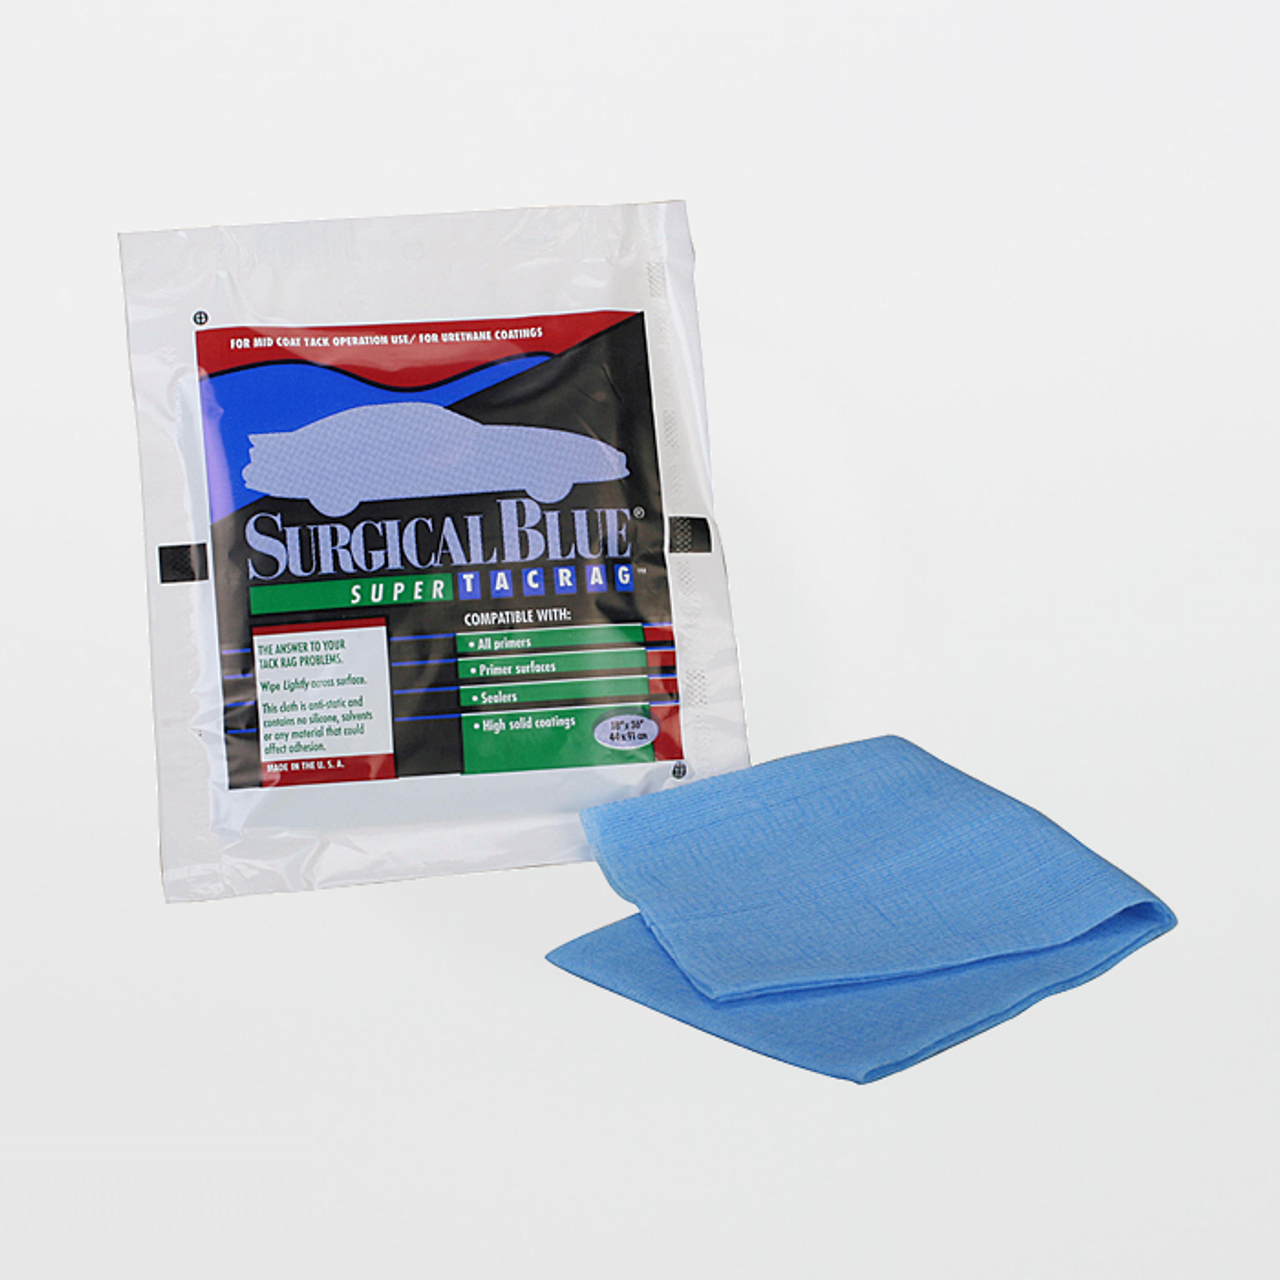 Case of 18 x 36 Tack Cloth Surgical Blue (Cheesecloth Fabric)